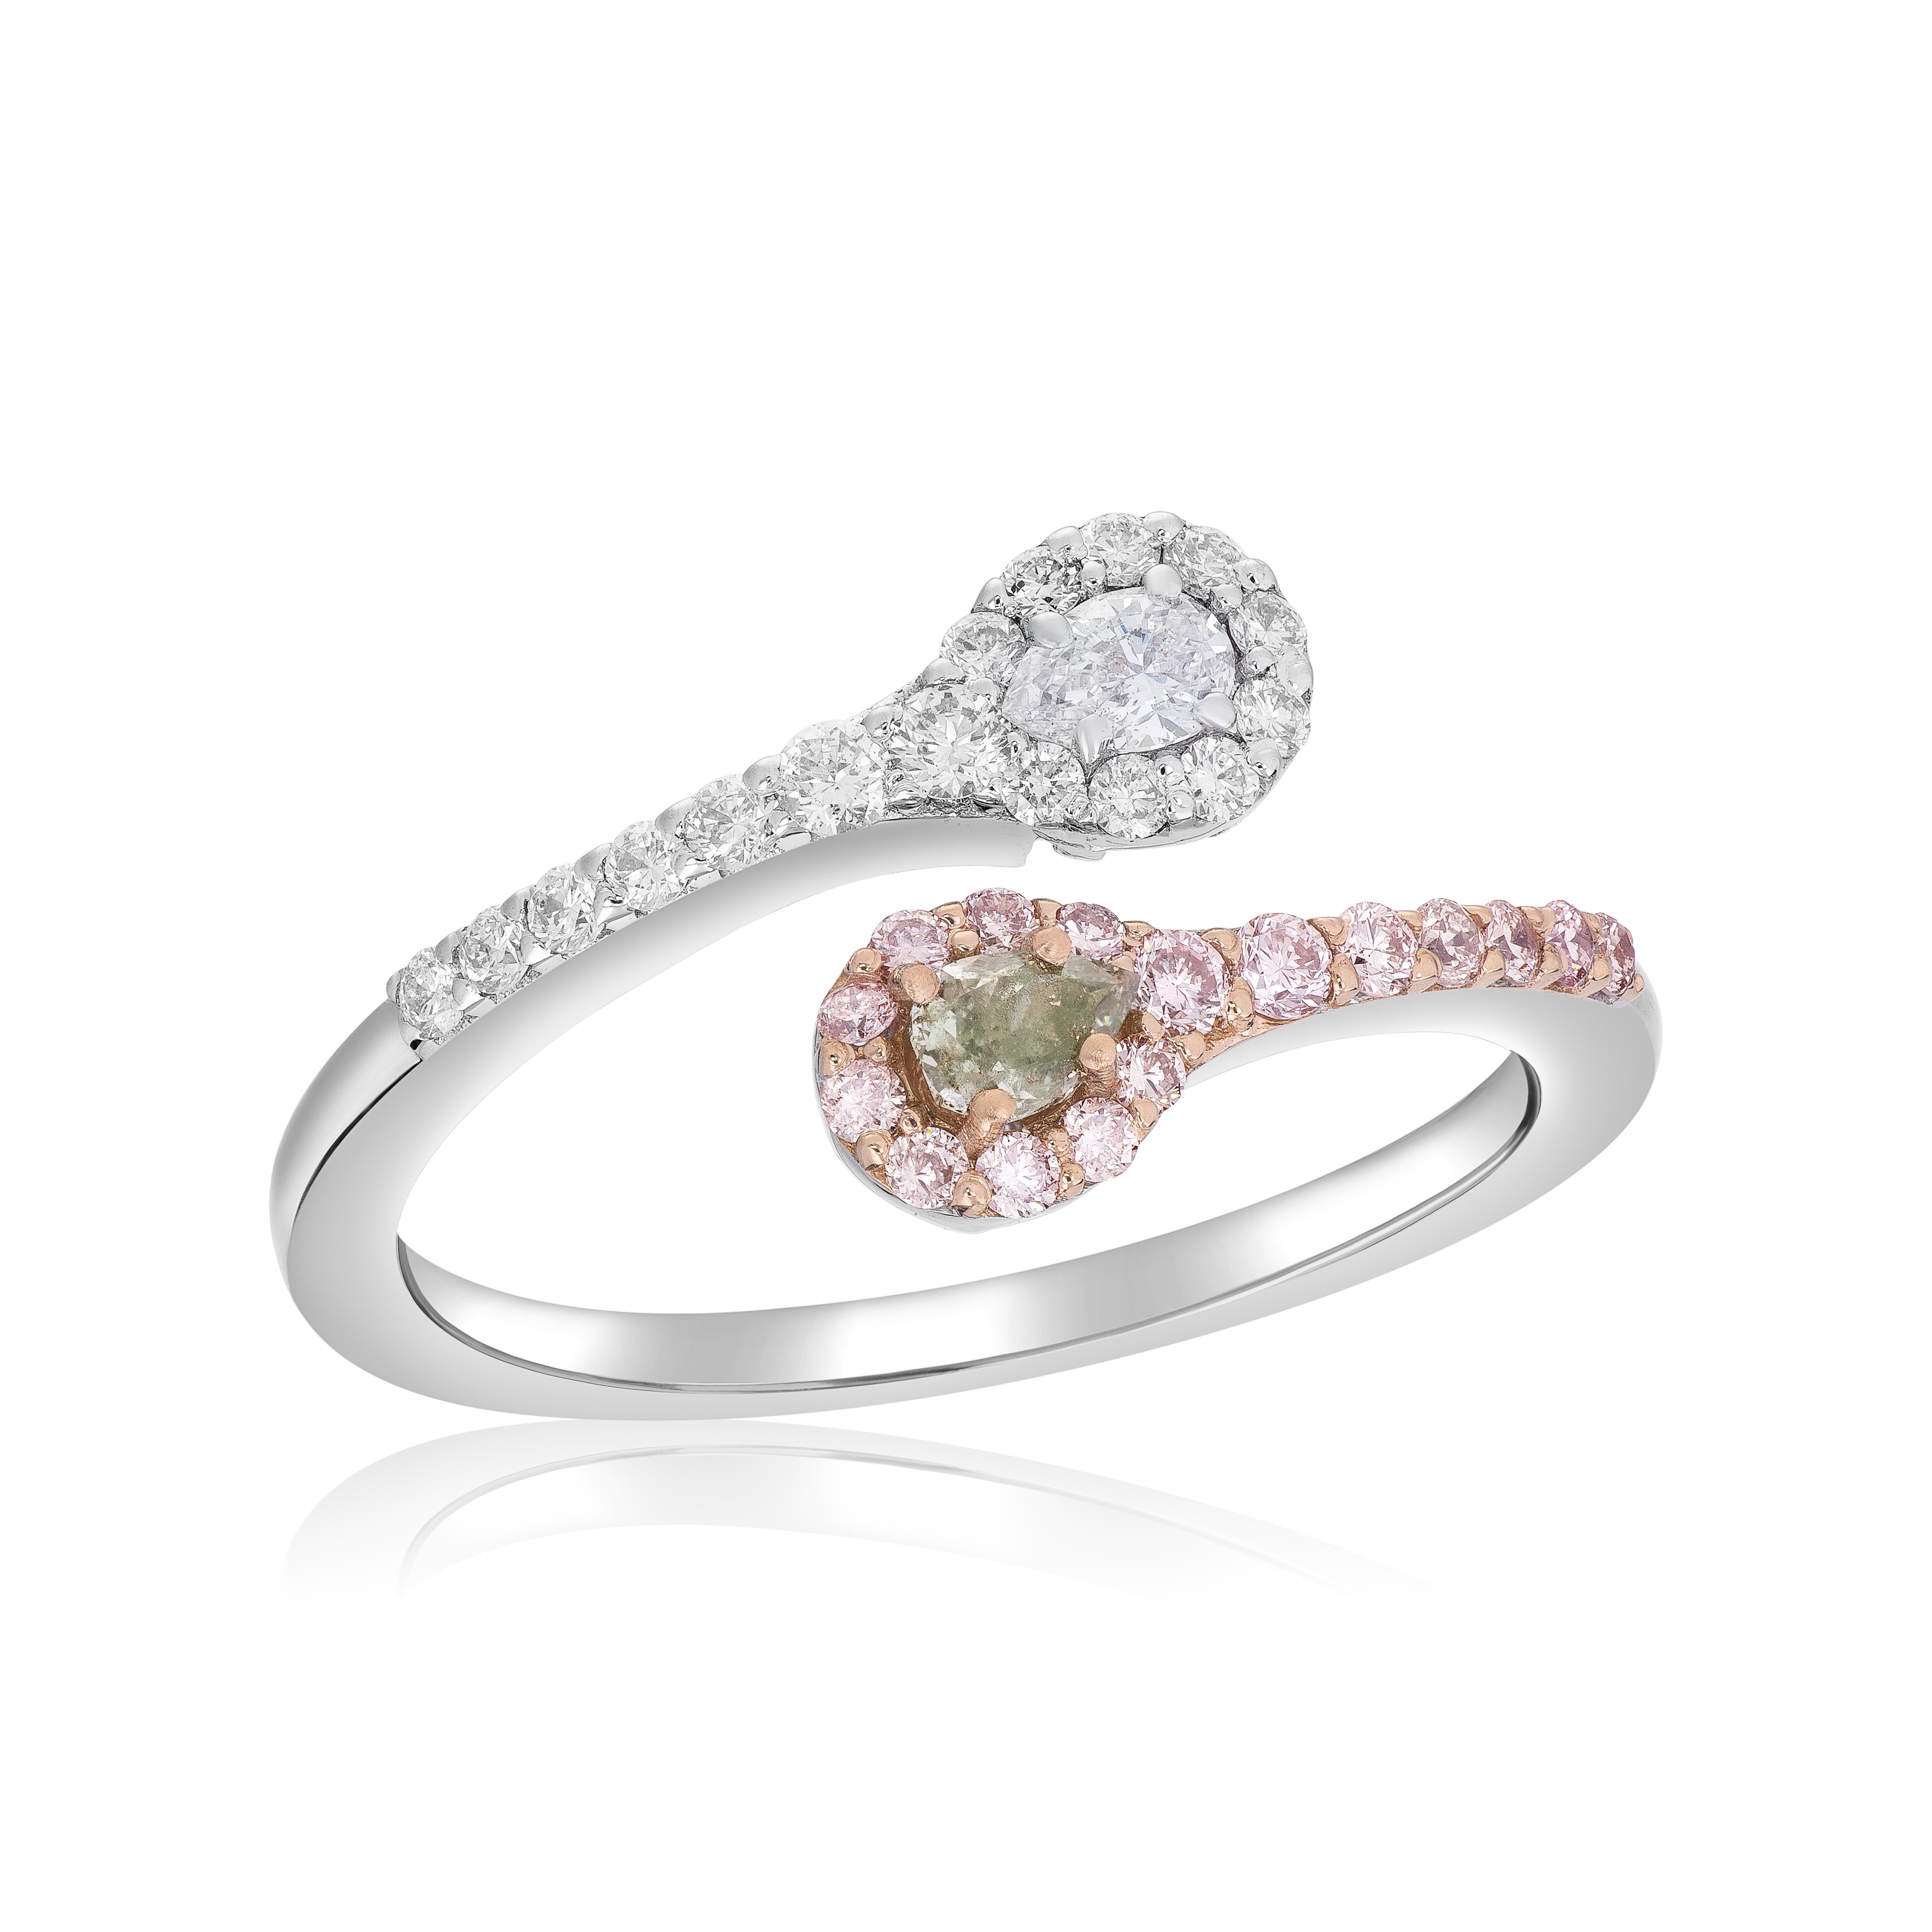 Make a statement with this exquisite fancy color diamond pear shape bypass ring. The centerpiece of this ring is a striking 0.11 carat fancy greenish gray pear-shaped diamond, capturing attention with its unique and captivating hue. Adding a touch